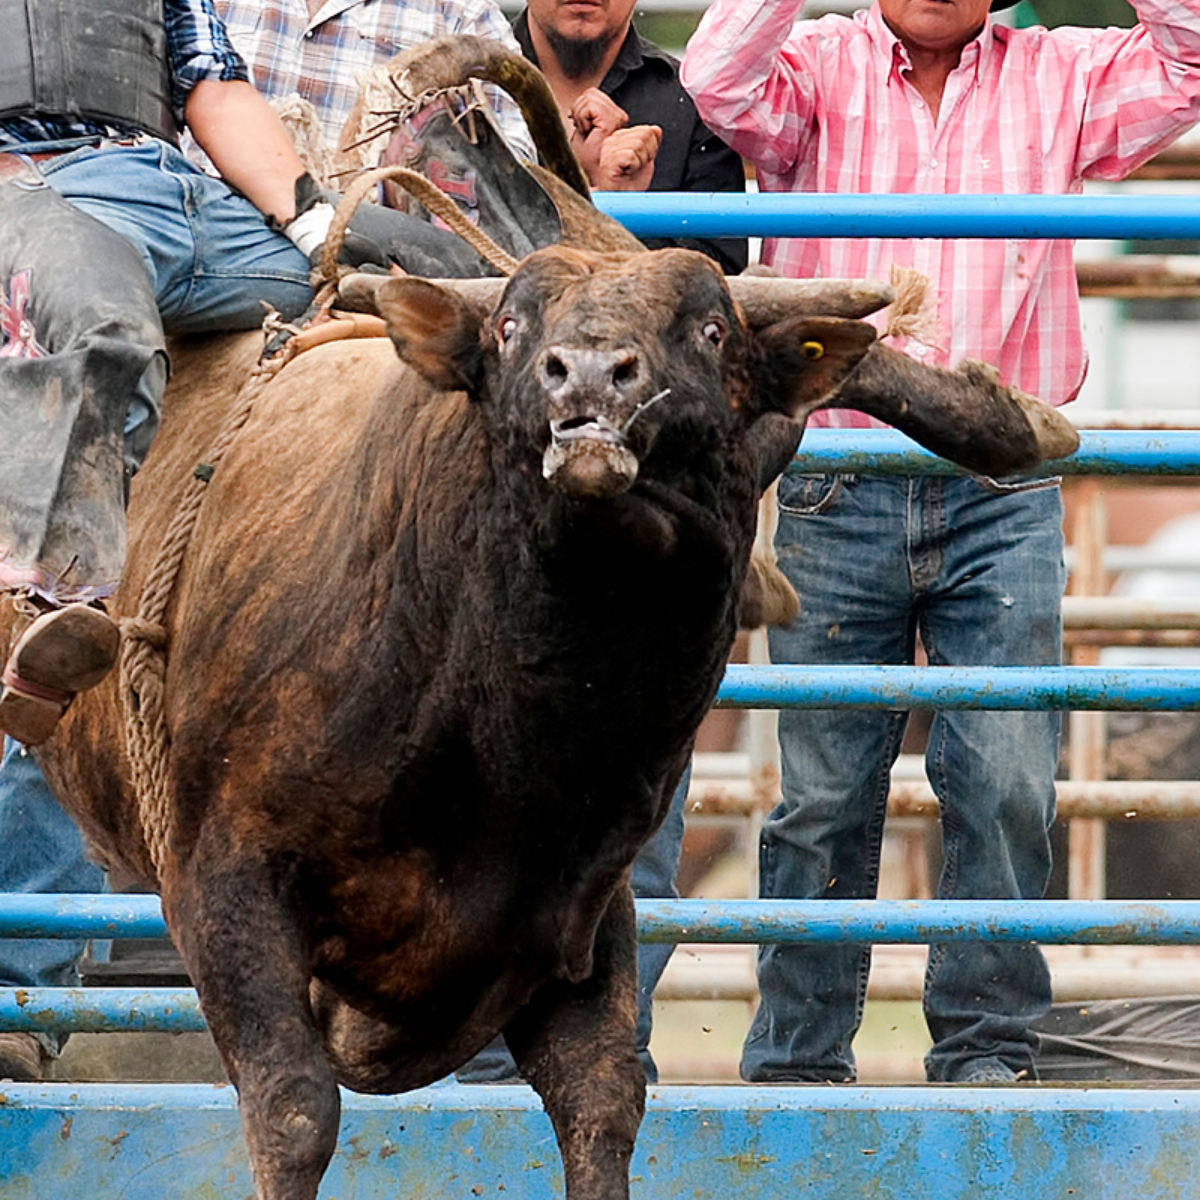 A close up of a bull's face during a bull riding event